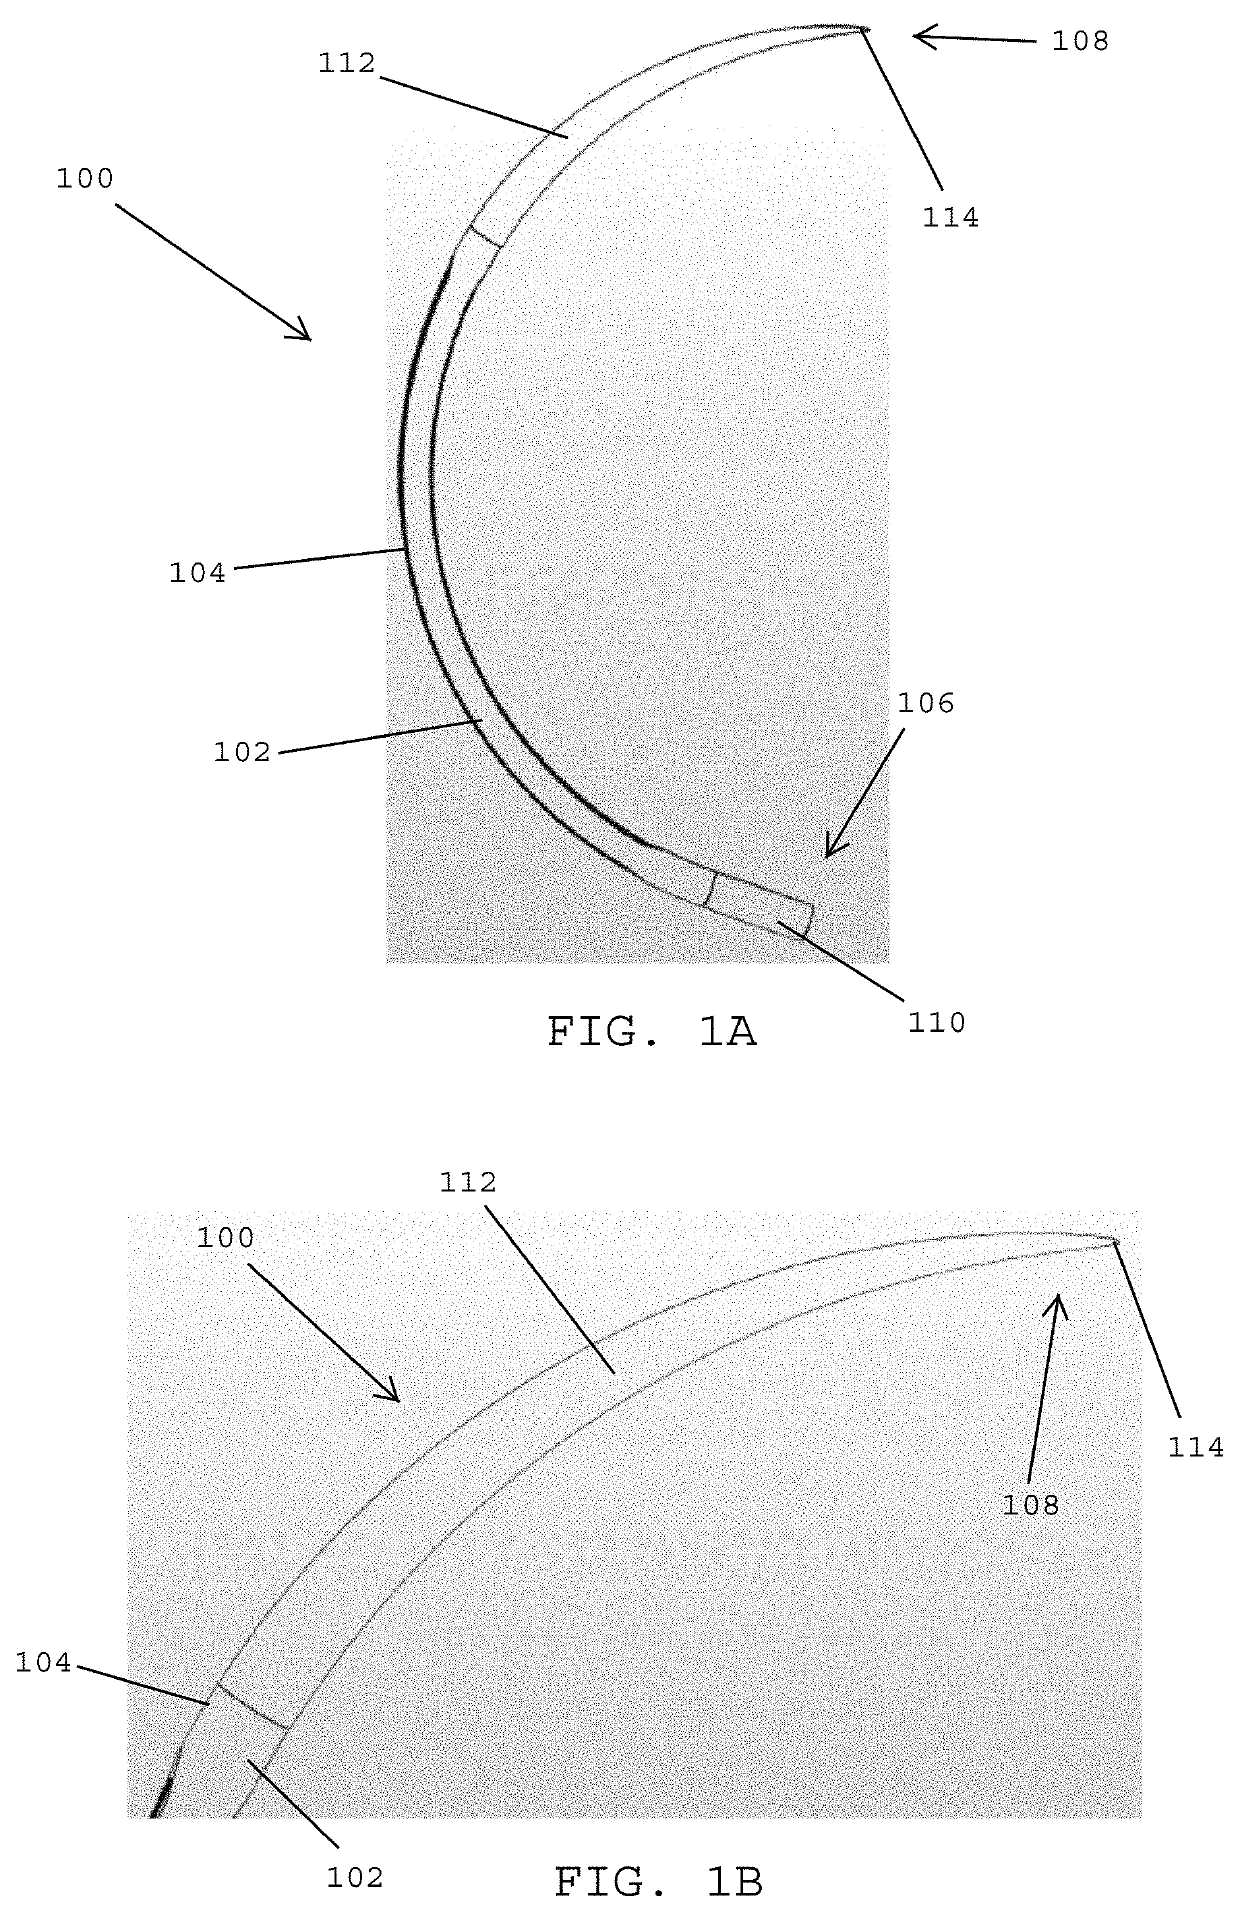 Suture needle packages for loading suture needles and methods of passing suture needles through trocars